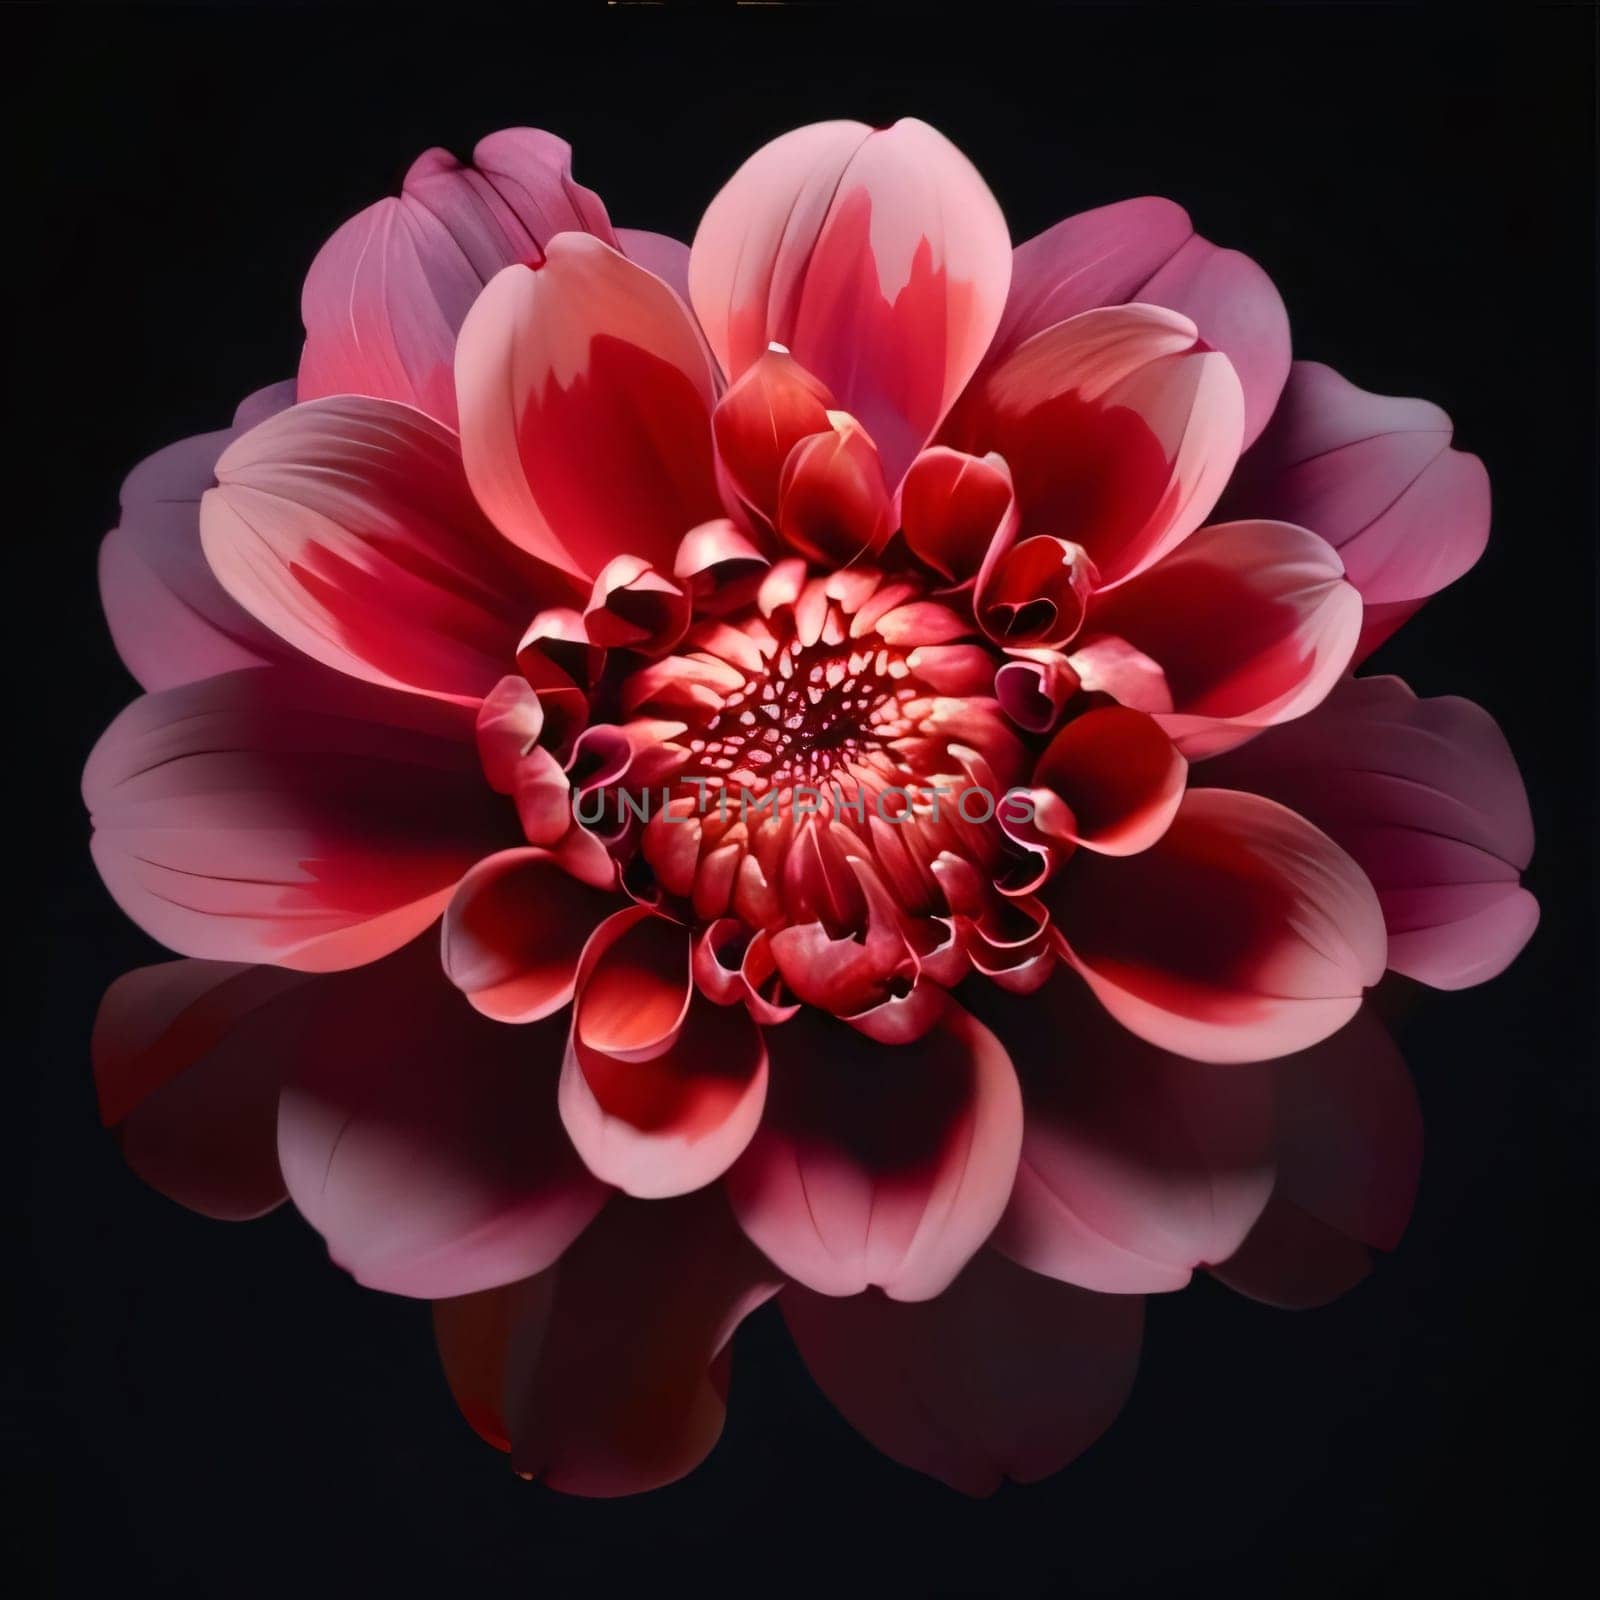 Dahlia flower isolated on black. Flowering flowers, a symbol of spring, new life. by ThemesS